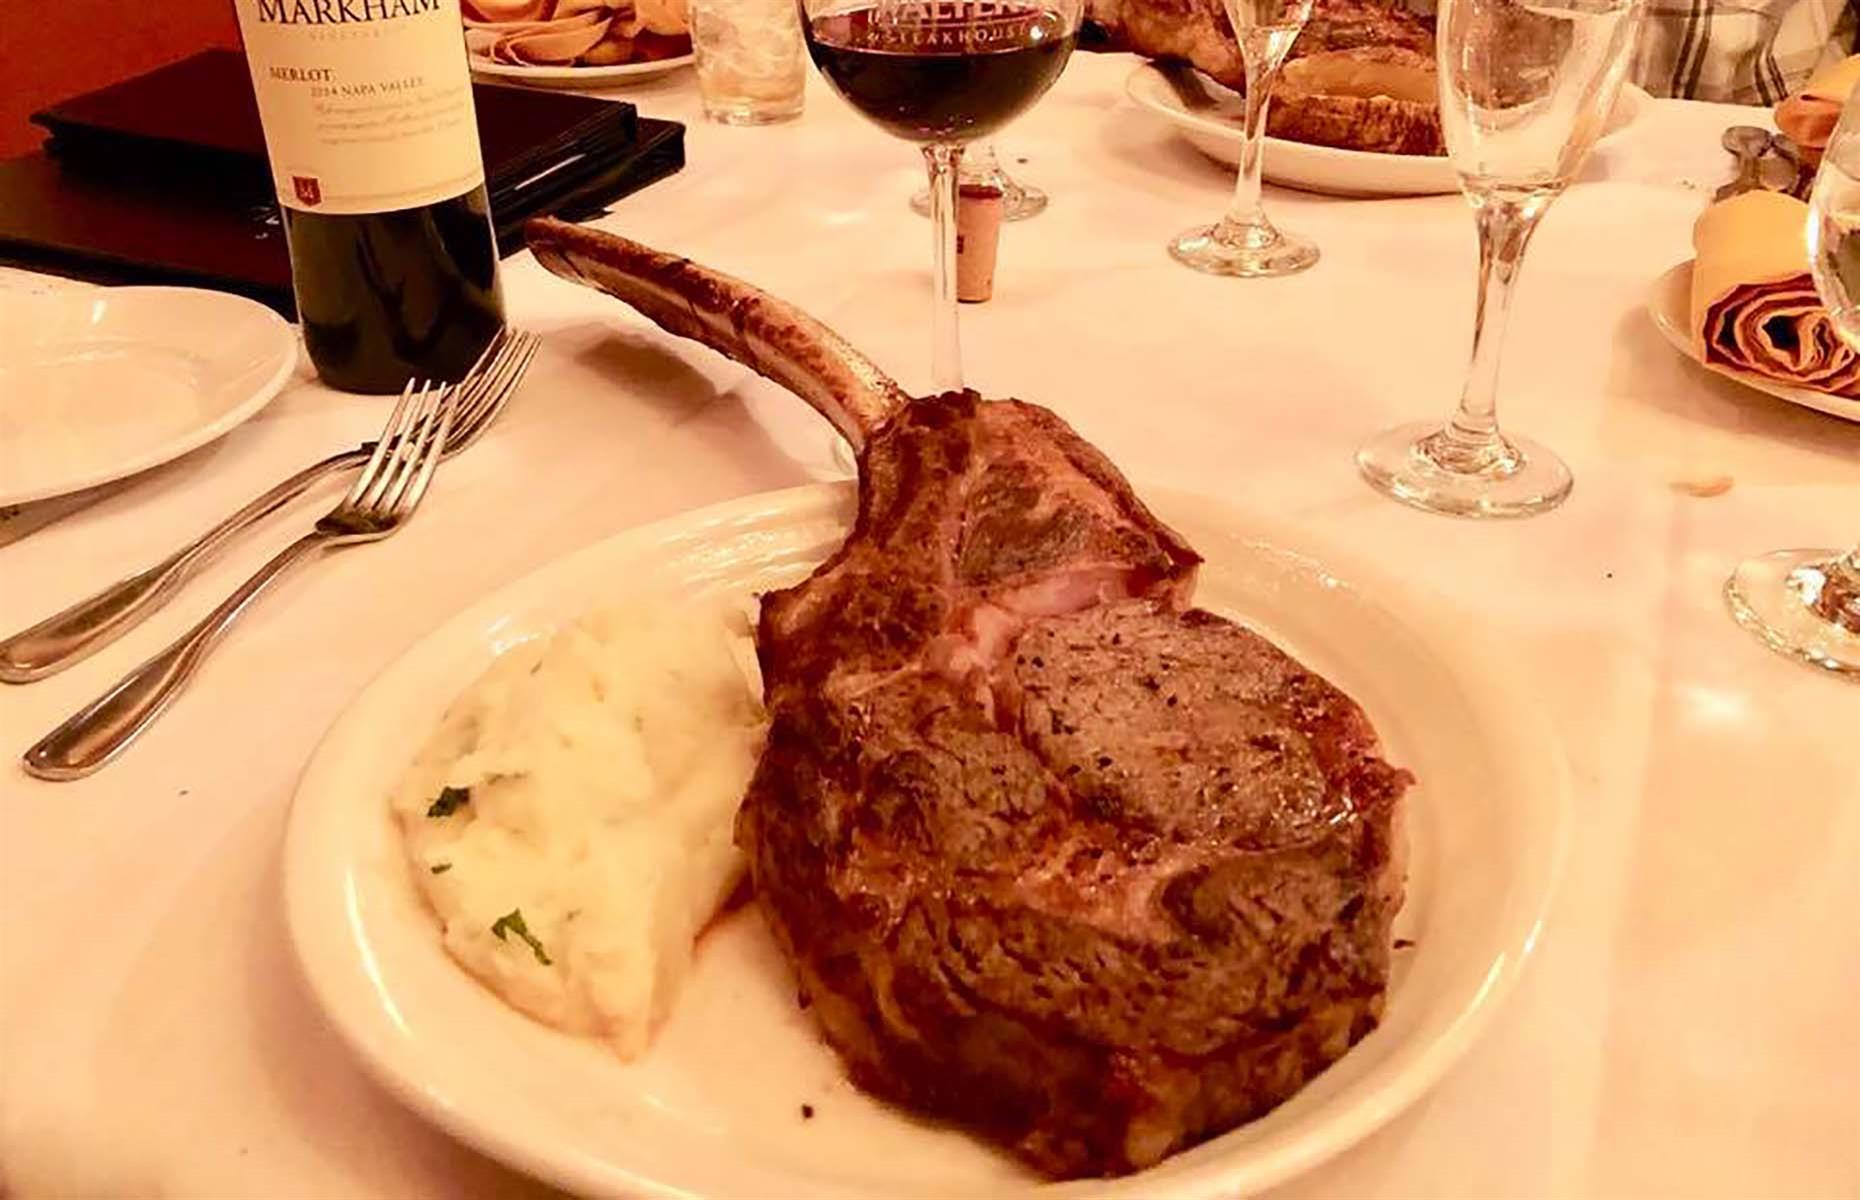 <p>A top stop on Delaware's Culinary Trail, <a href="http://www.walters-steakhouse.com/">Walter's</a> is an unmissable experience. It's <a href="https://www.yelp.com/biz/walters-steakhouse-wilmington">a favorite among locals</a> thanks to the massive cuts of prime rib and old-school steakhouse atmosphere, plus the servers are friendly and attentive which only adds to the charm. Friday is usually prime rib night – there's a special menu to choose from that includes all the customer favorites, from French onion soup to chocolate mousse cake and, of course, the prime rib.</p>